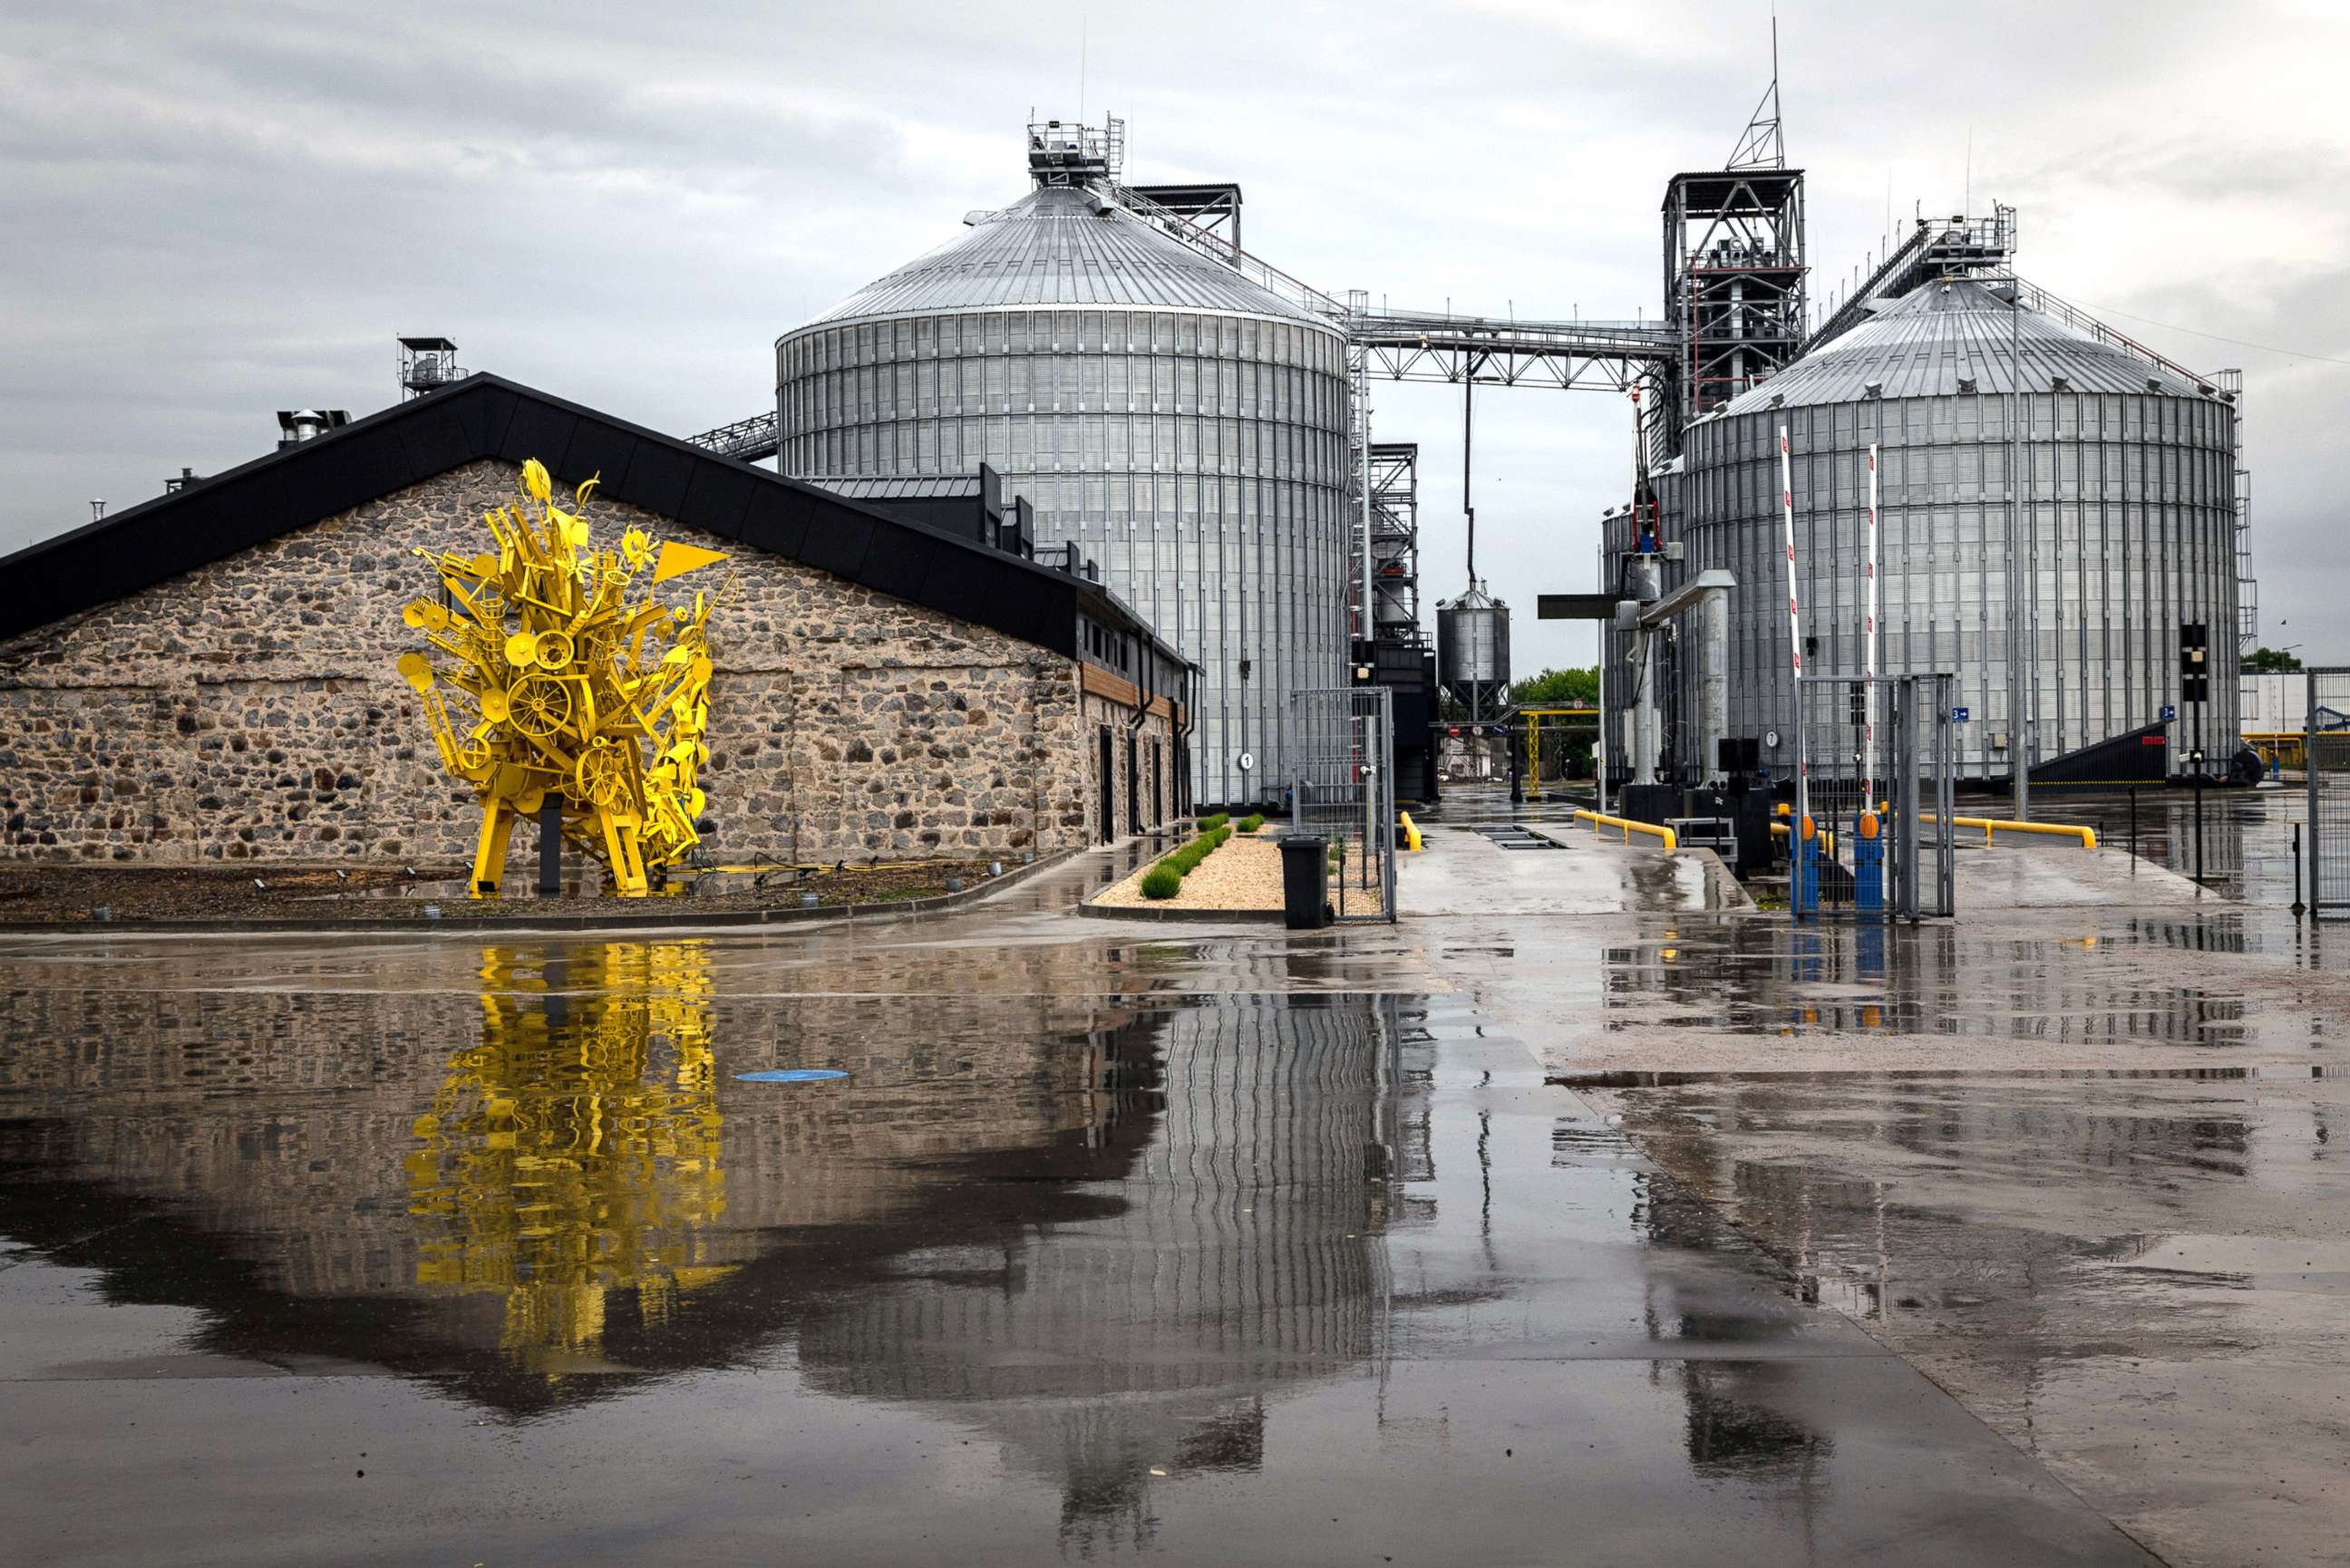 PHOTO: A grain storage facility is pictured in Boryspil, Ukraine, on May 30, 2022. Russia's foreign minister is scheduled to visit Turkey next week to discuss the possible release of Ukrainian grain from Black Sea ports.